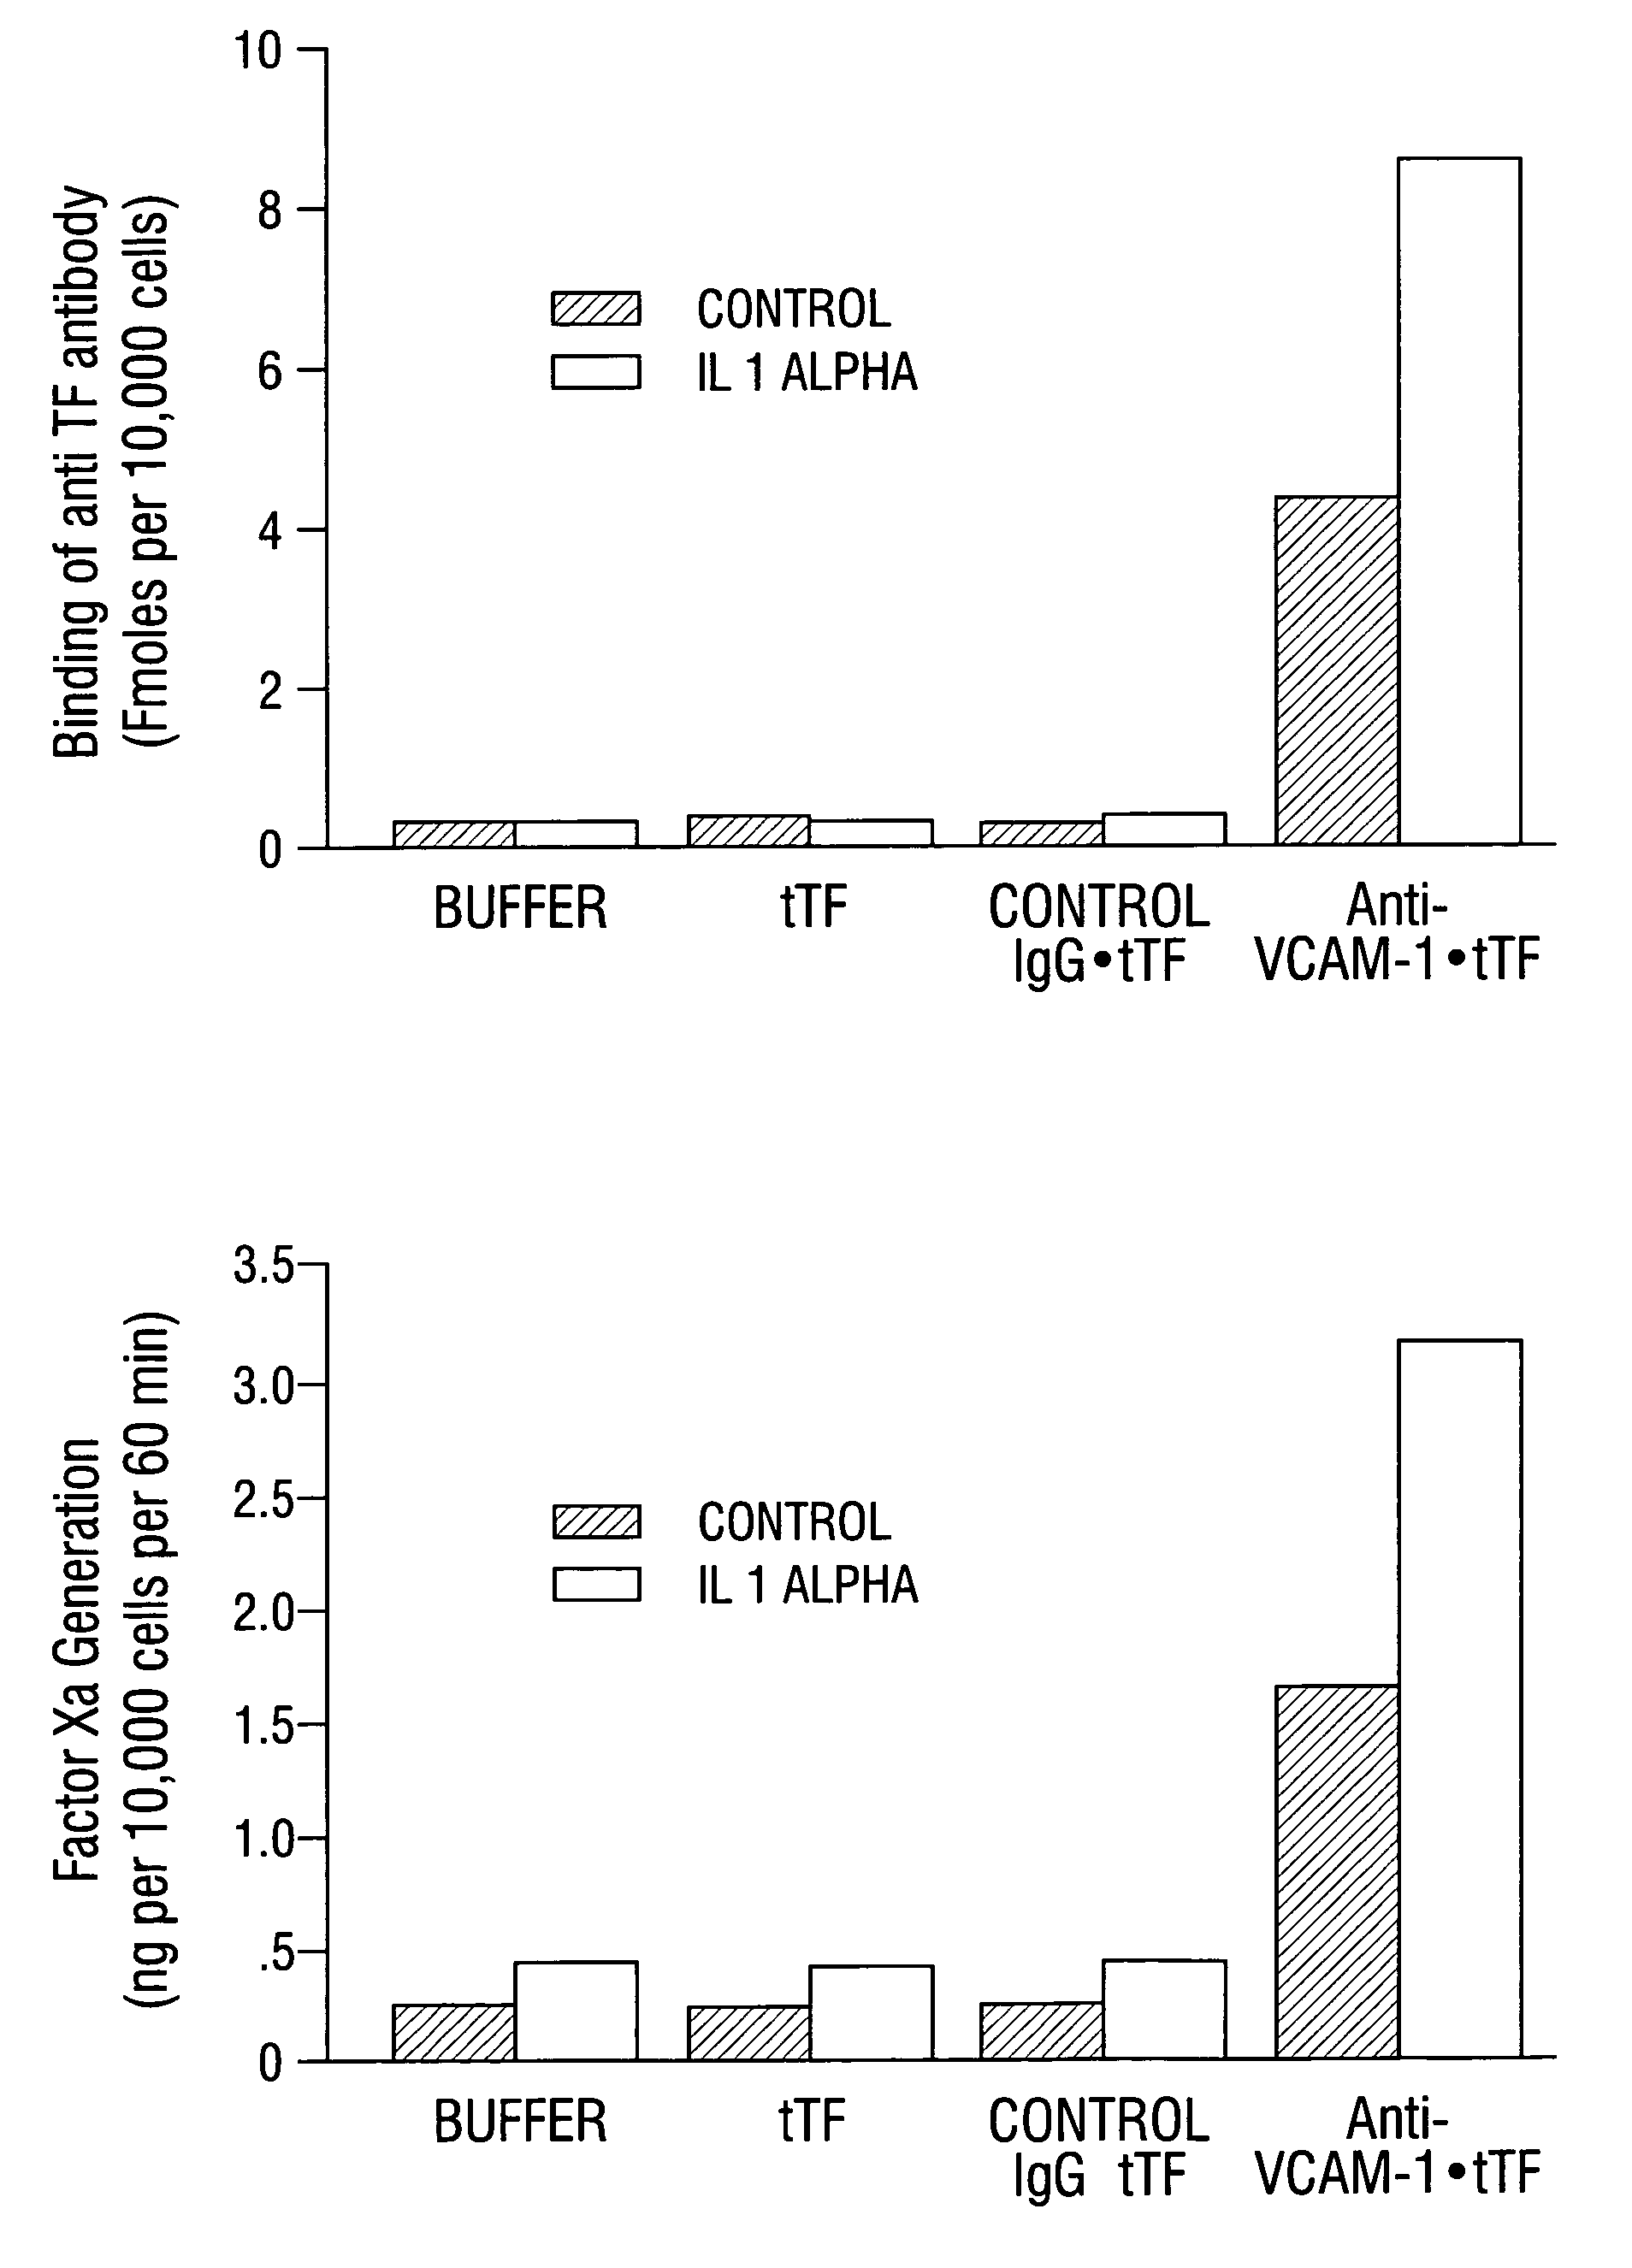 Cancer treatment kits comprising therapeutic conjugates that bind to aminophospholipids